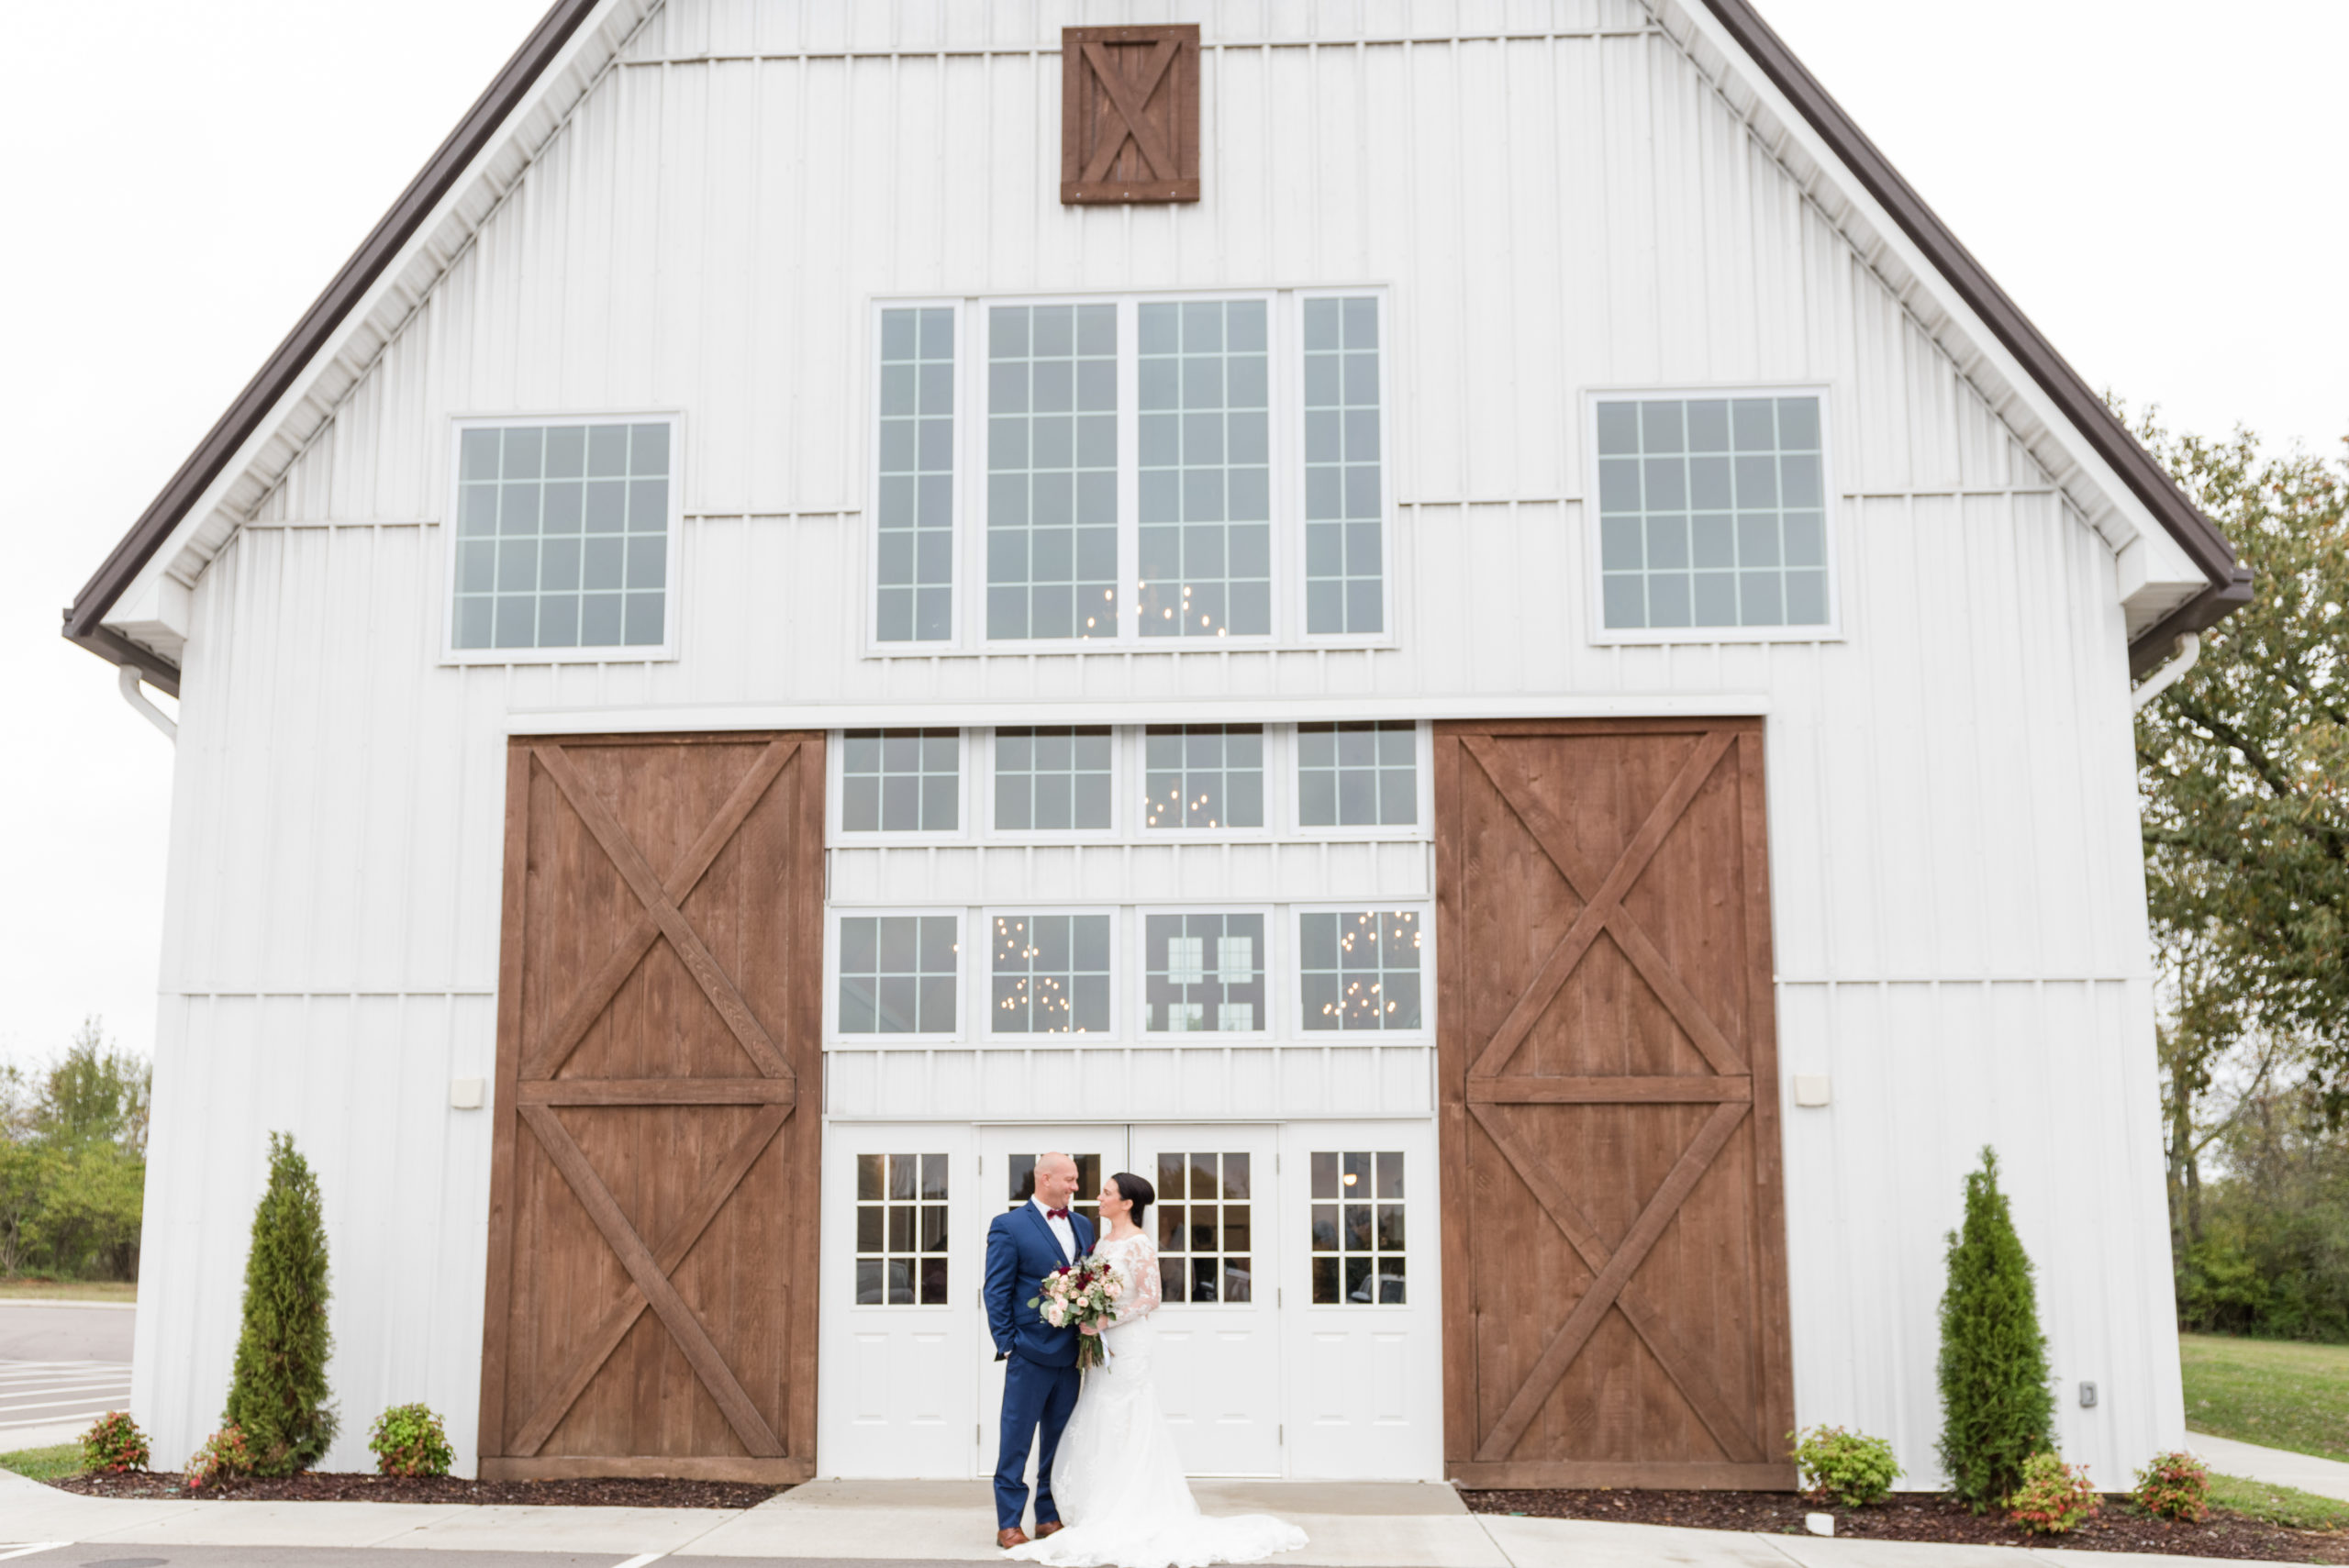 Fall Wedding at The Chapel in Gallatin, Tennessee, Rebecca Musayev Photography is a wedding photographer serving the Nashville, Tennessee area and destination locations.